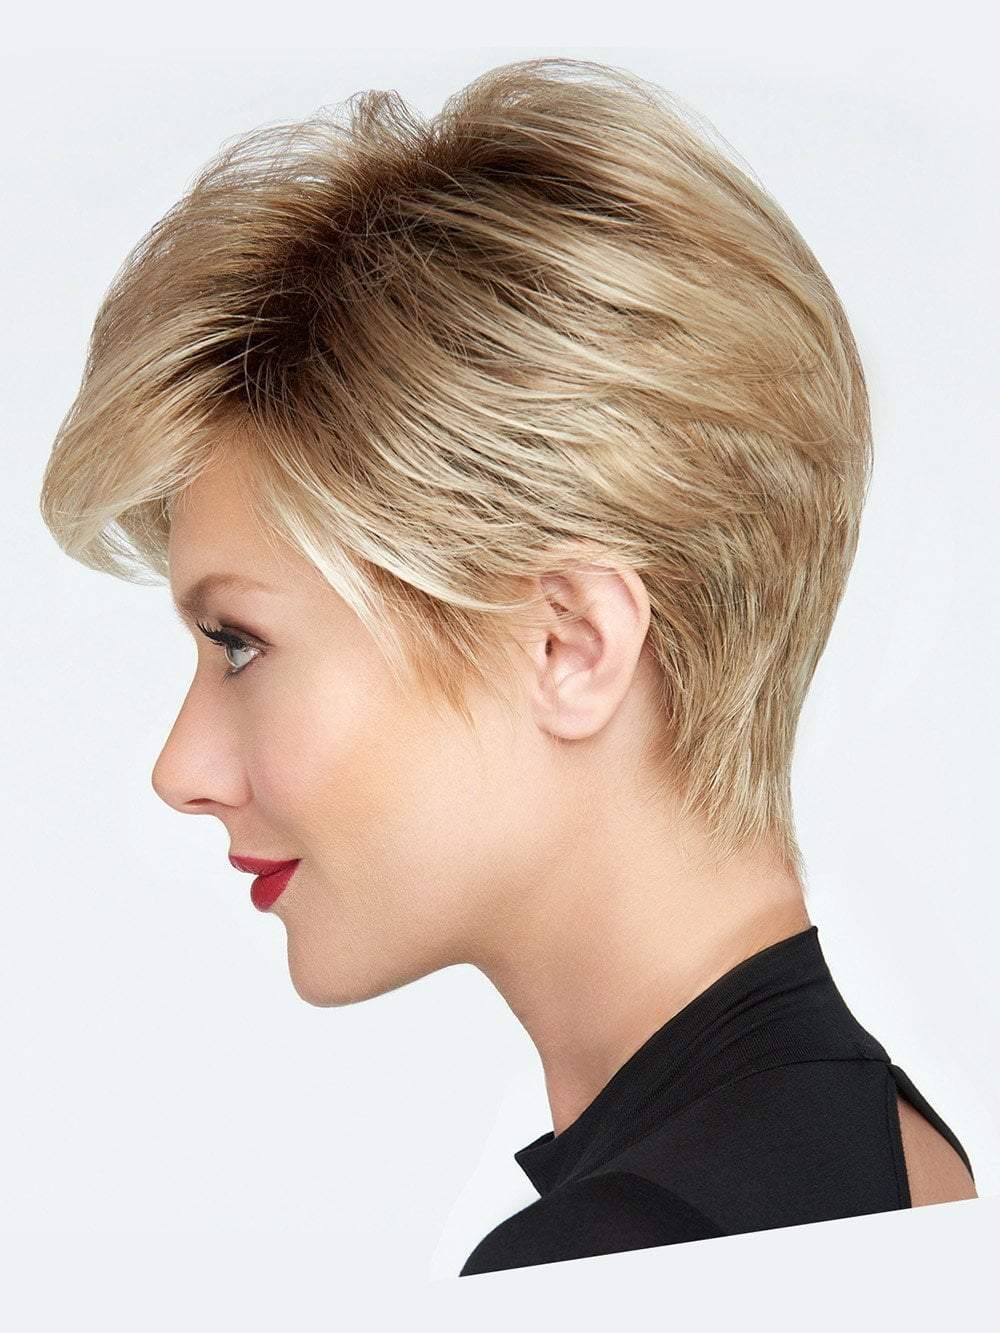 A gently sculpted and textured nape adds to the sophisticated look of this style